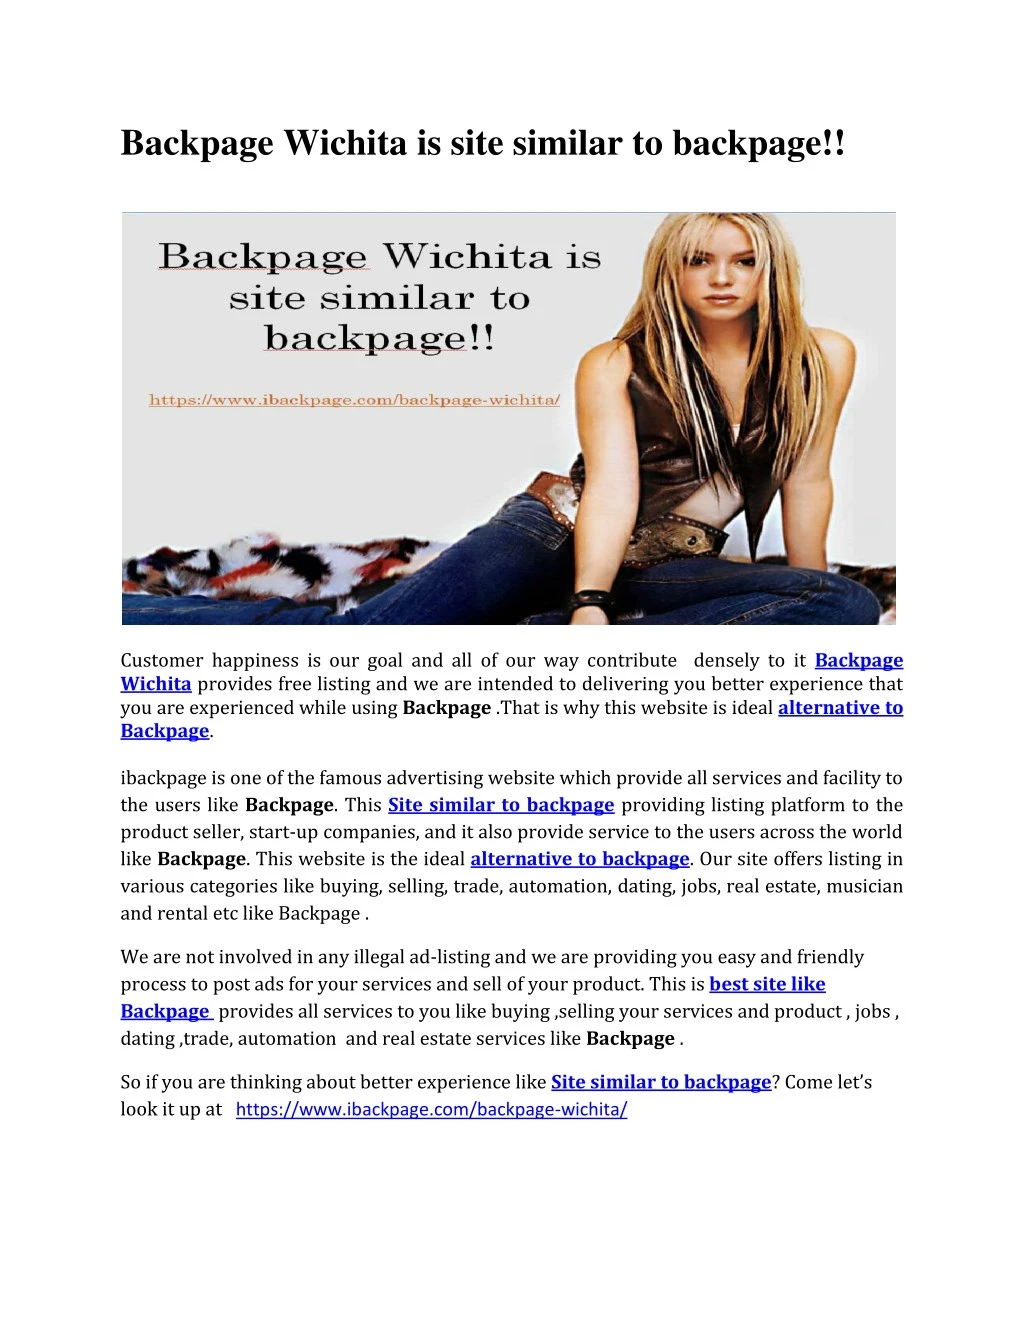 backpage wichita is site similar to backpage